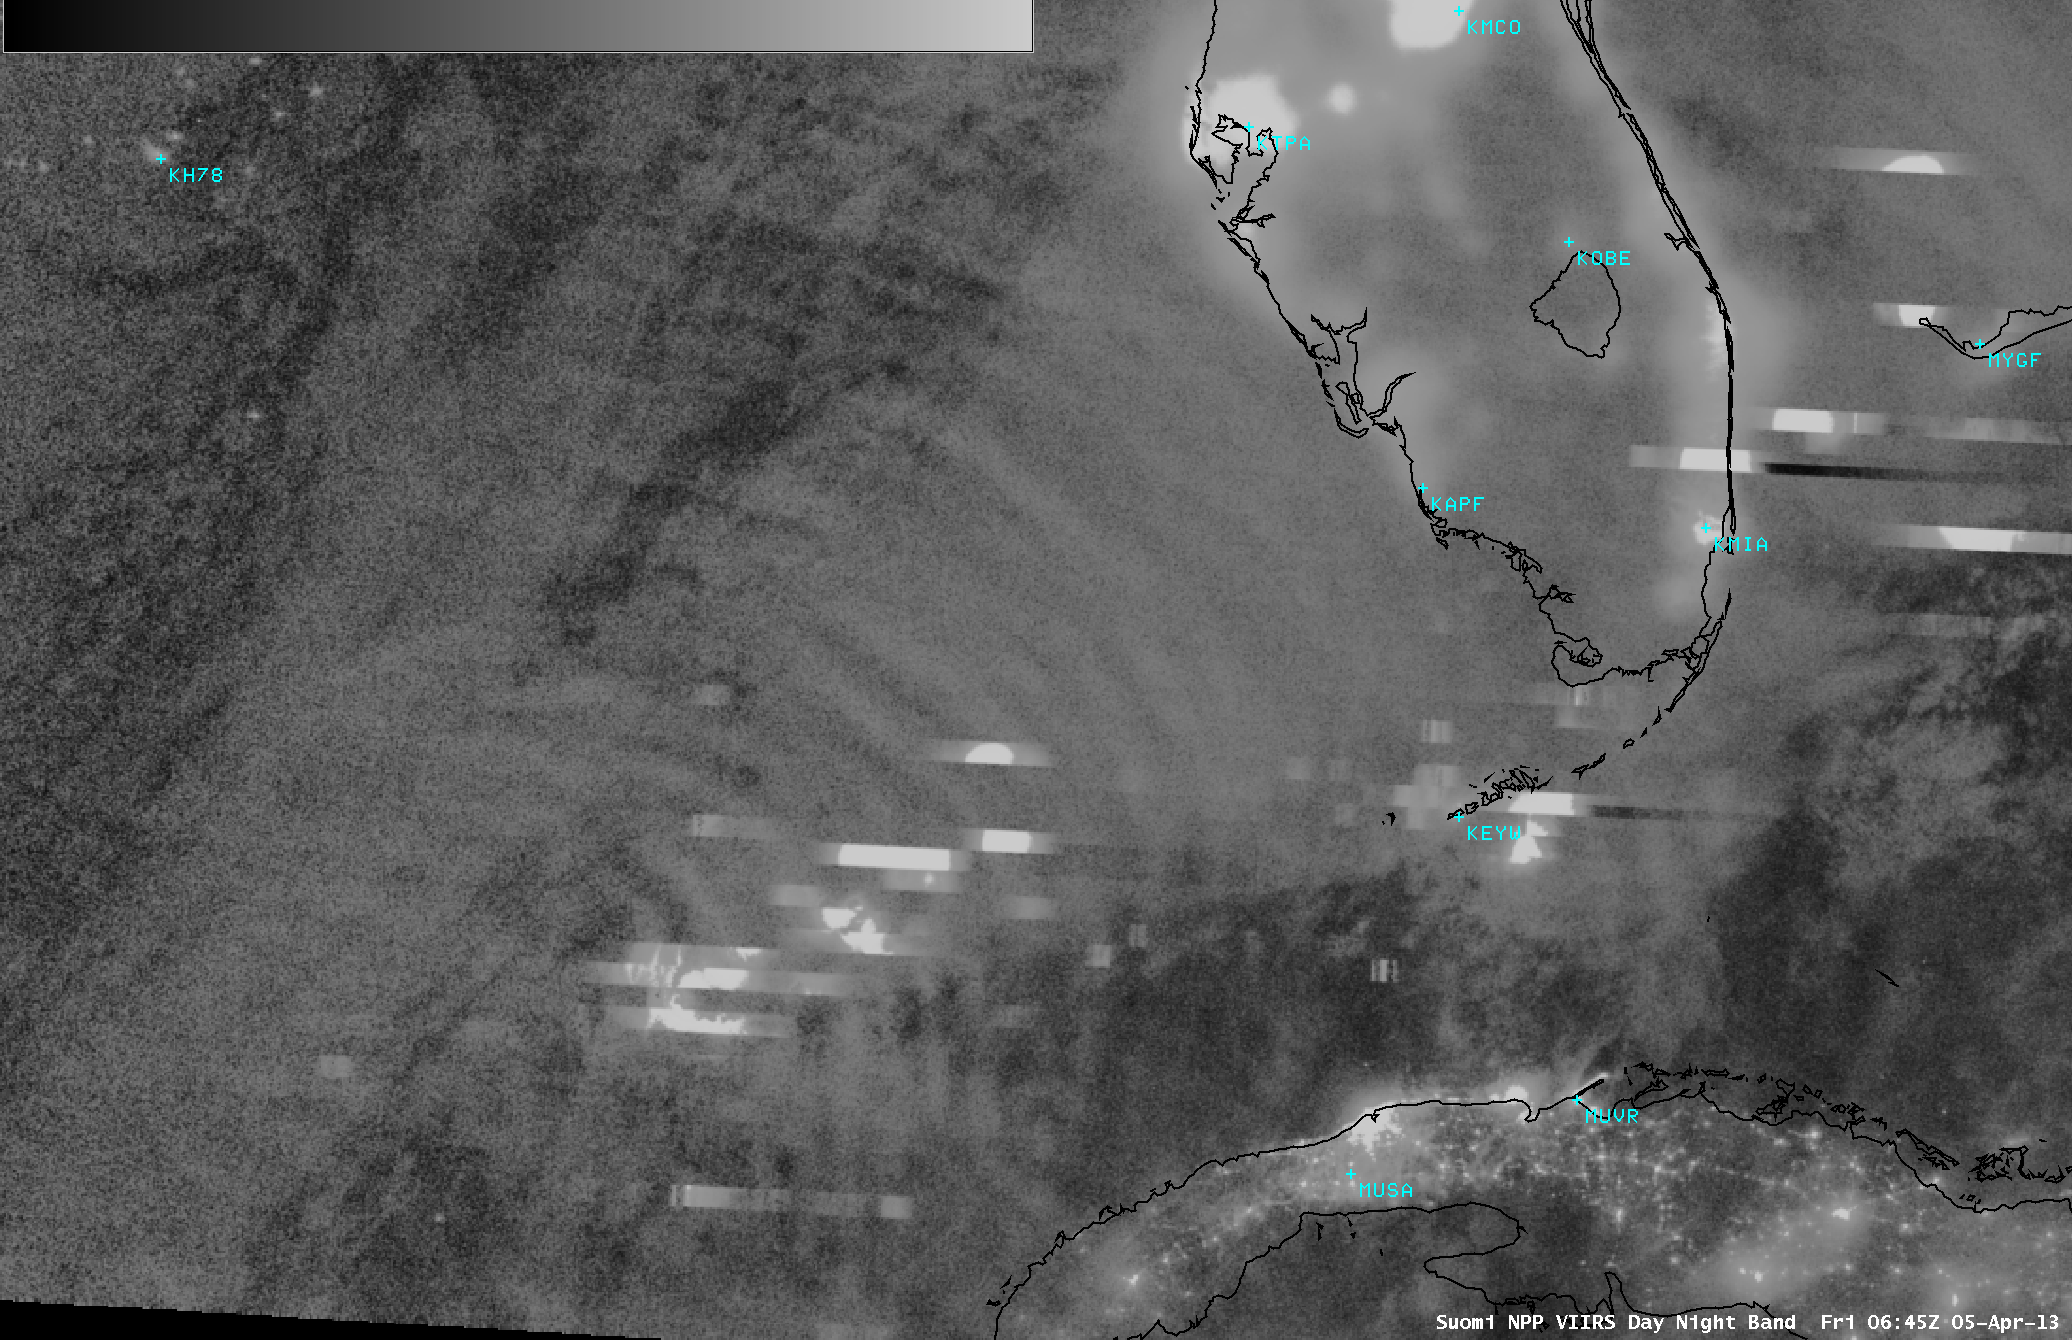 Suomi NPP VIIRS 0.7 Âµm Day/Night Band image with overlays of positive and negative cloud-to-ground lightning strikes